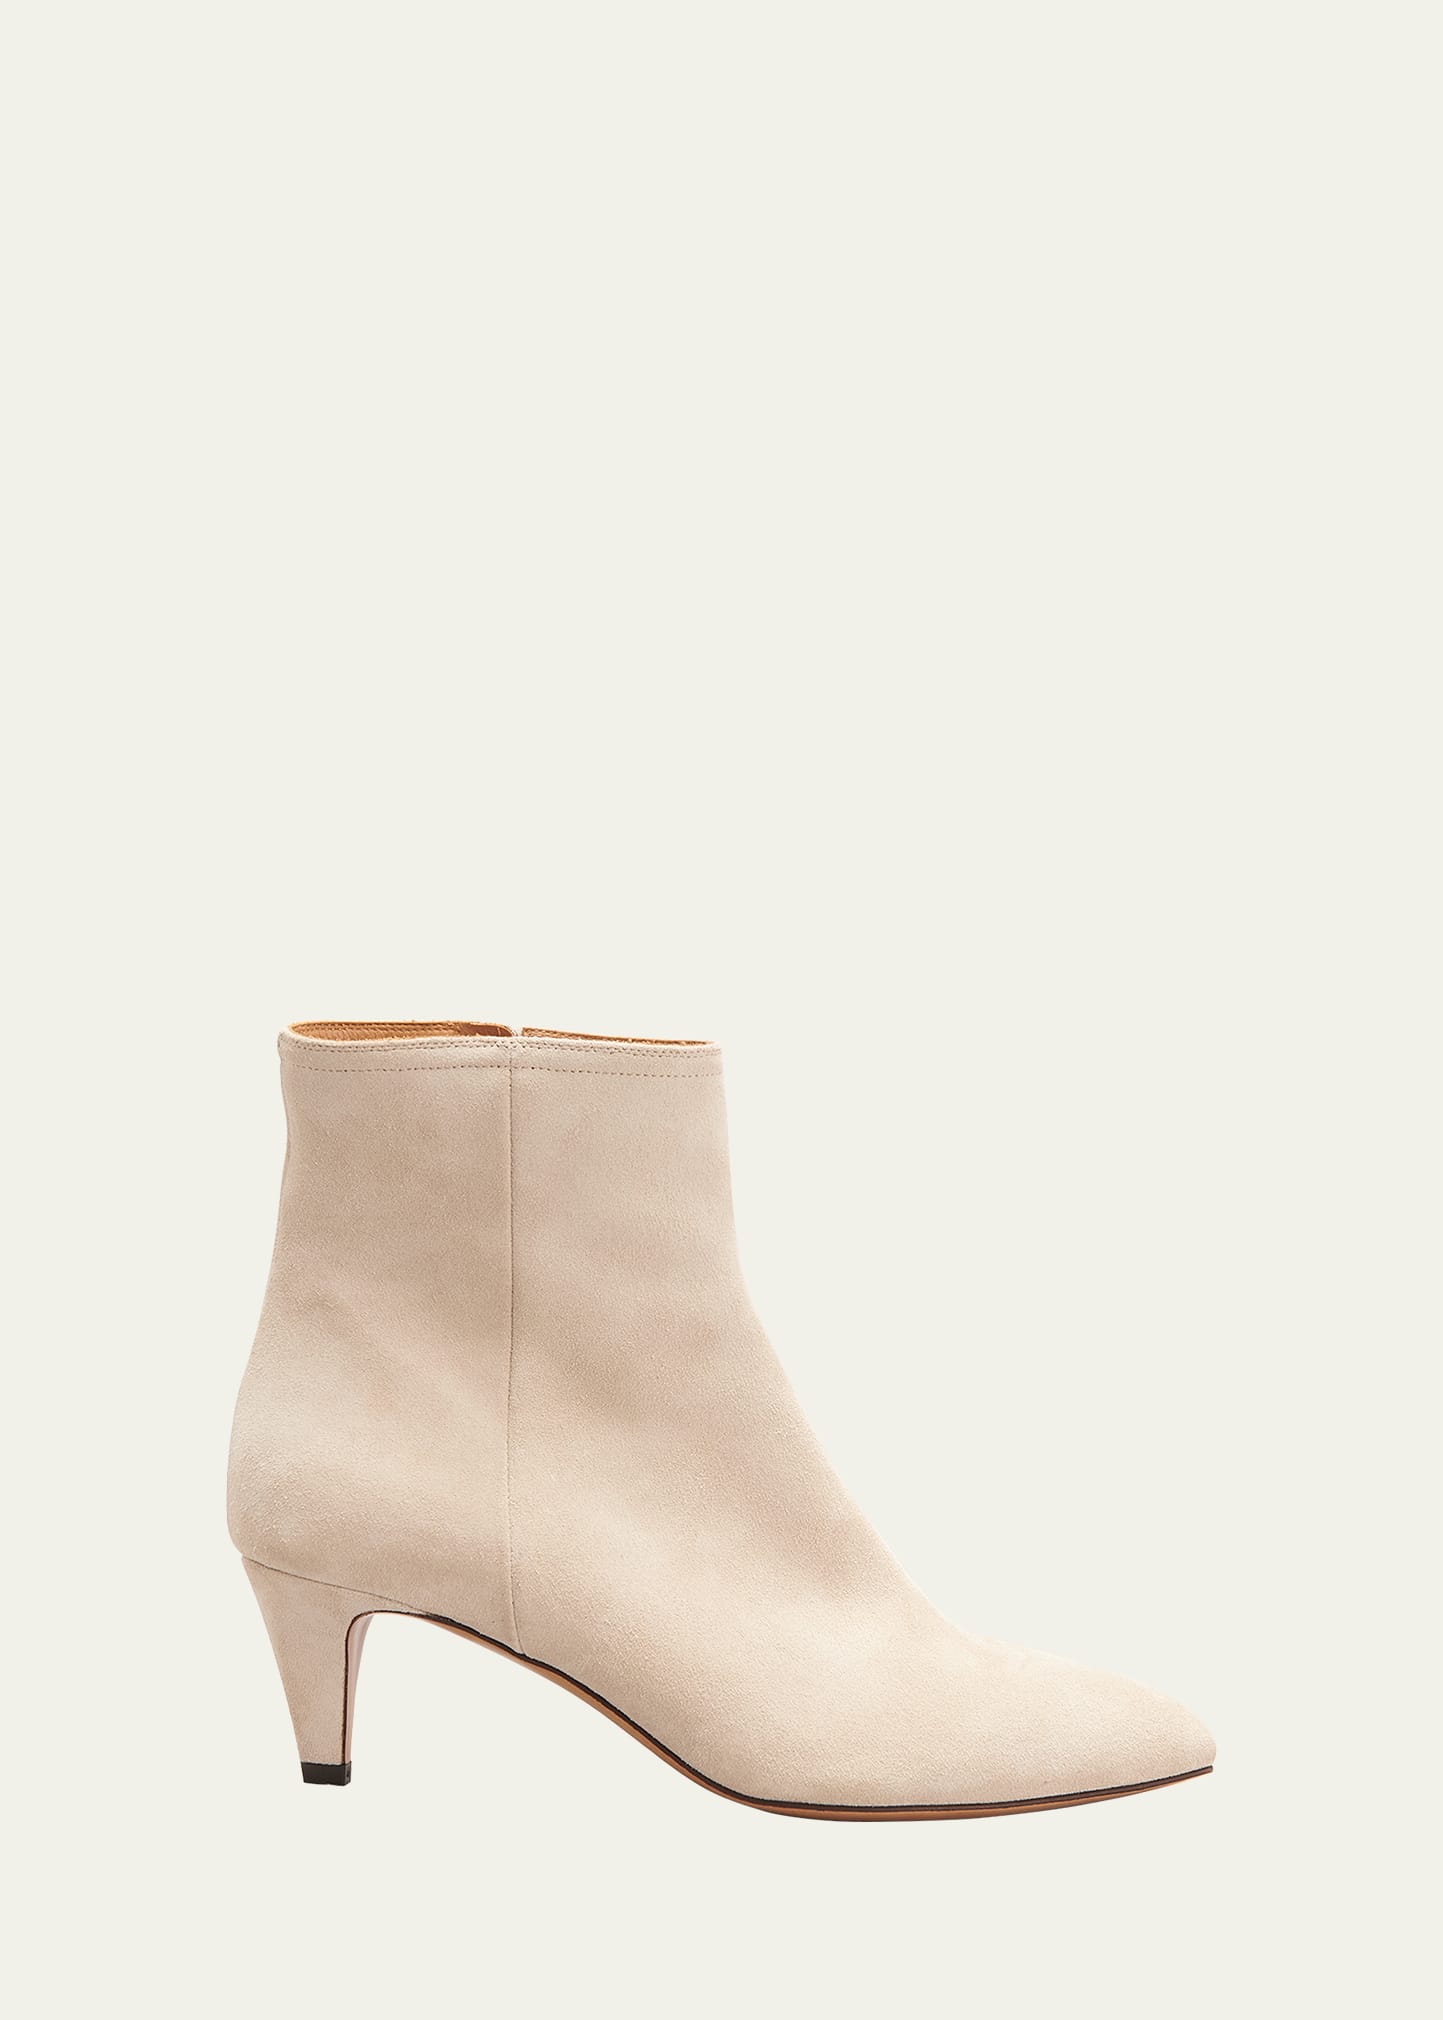 ISABEL MARANT DEONE SUEDE ANKLE BOOTIES